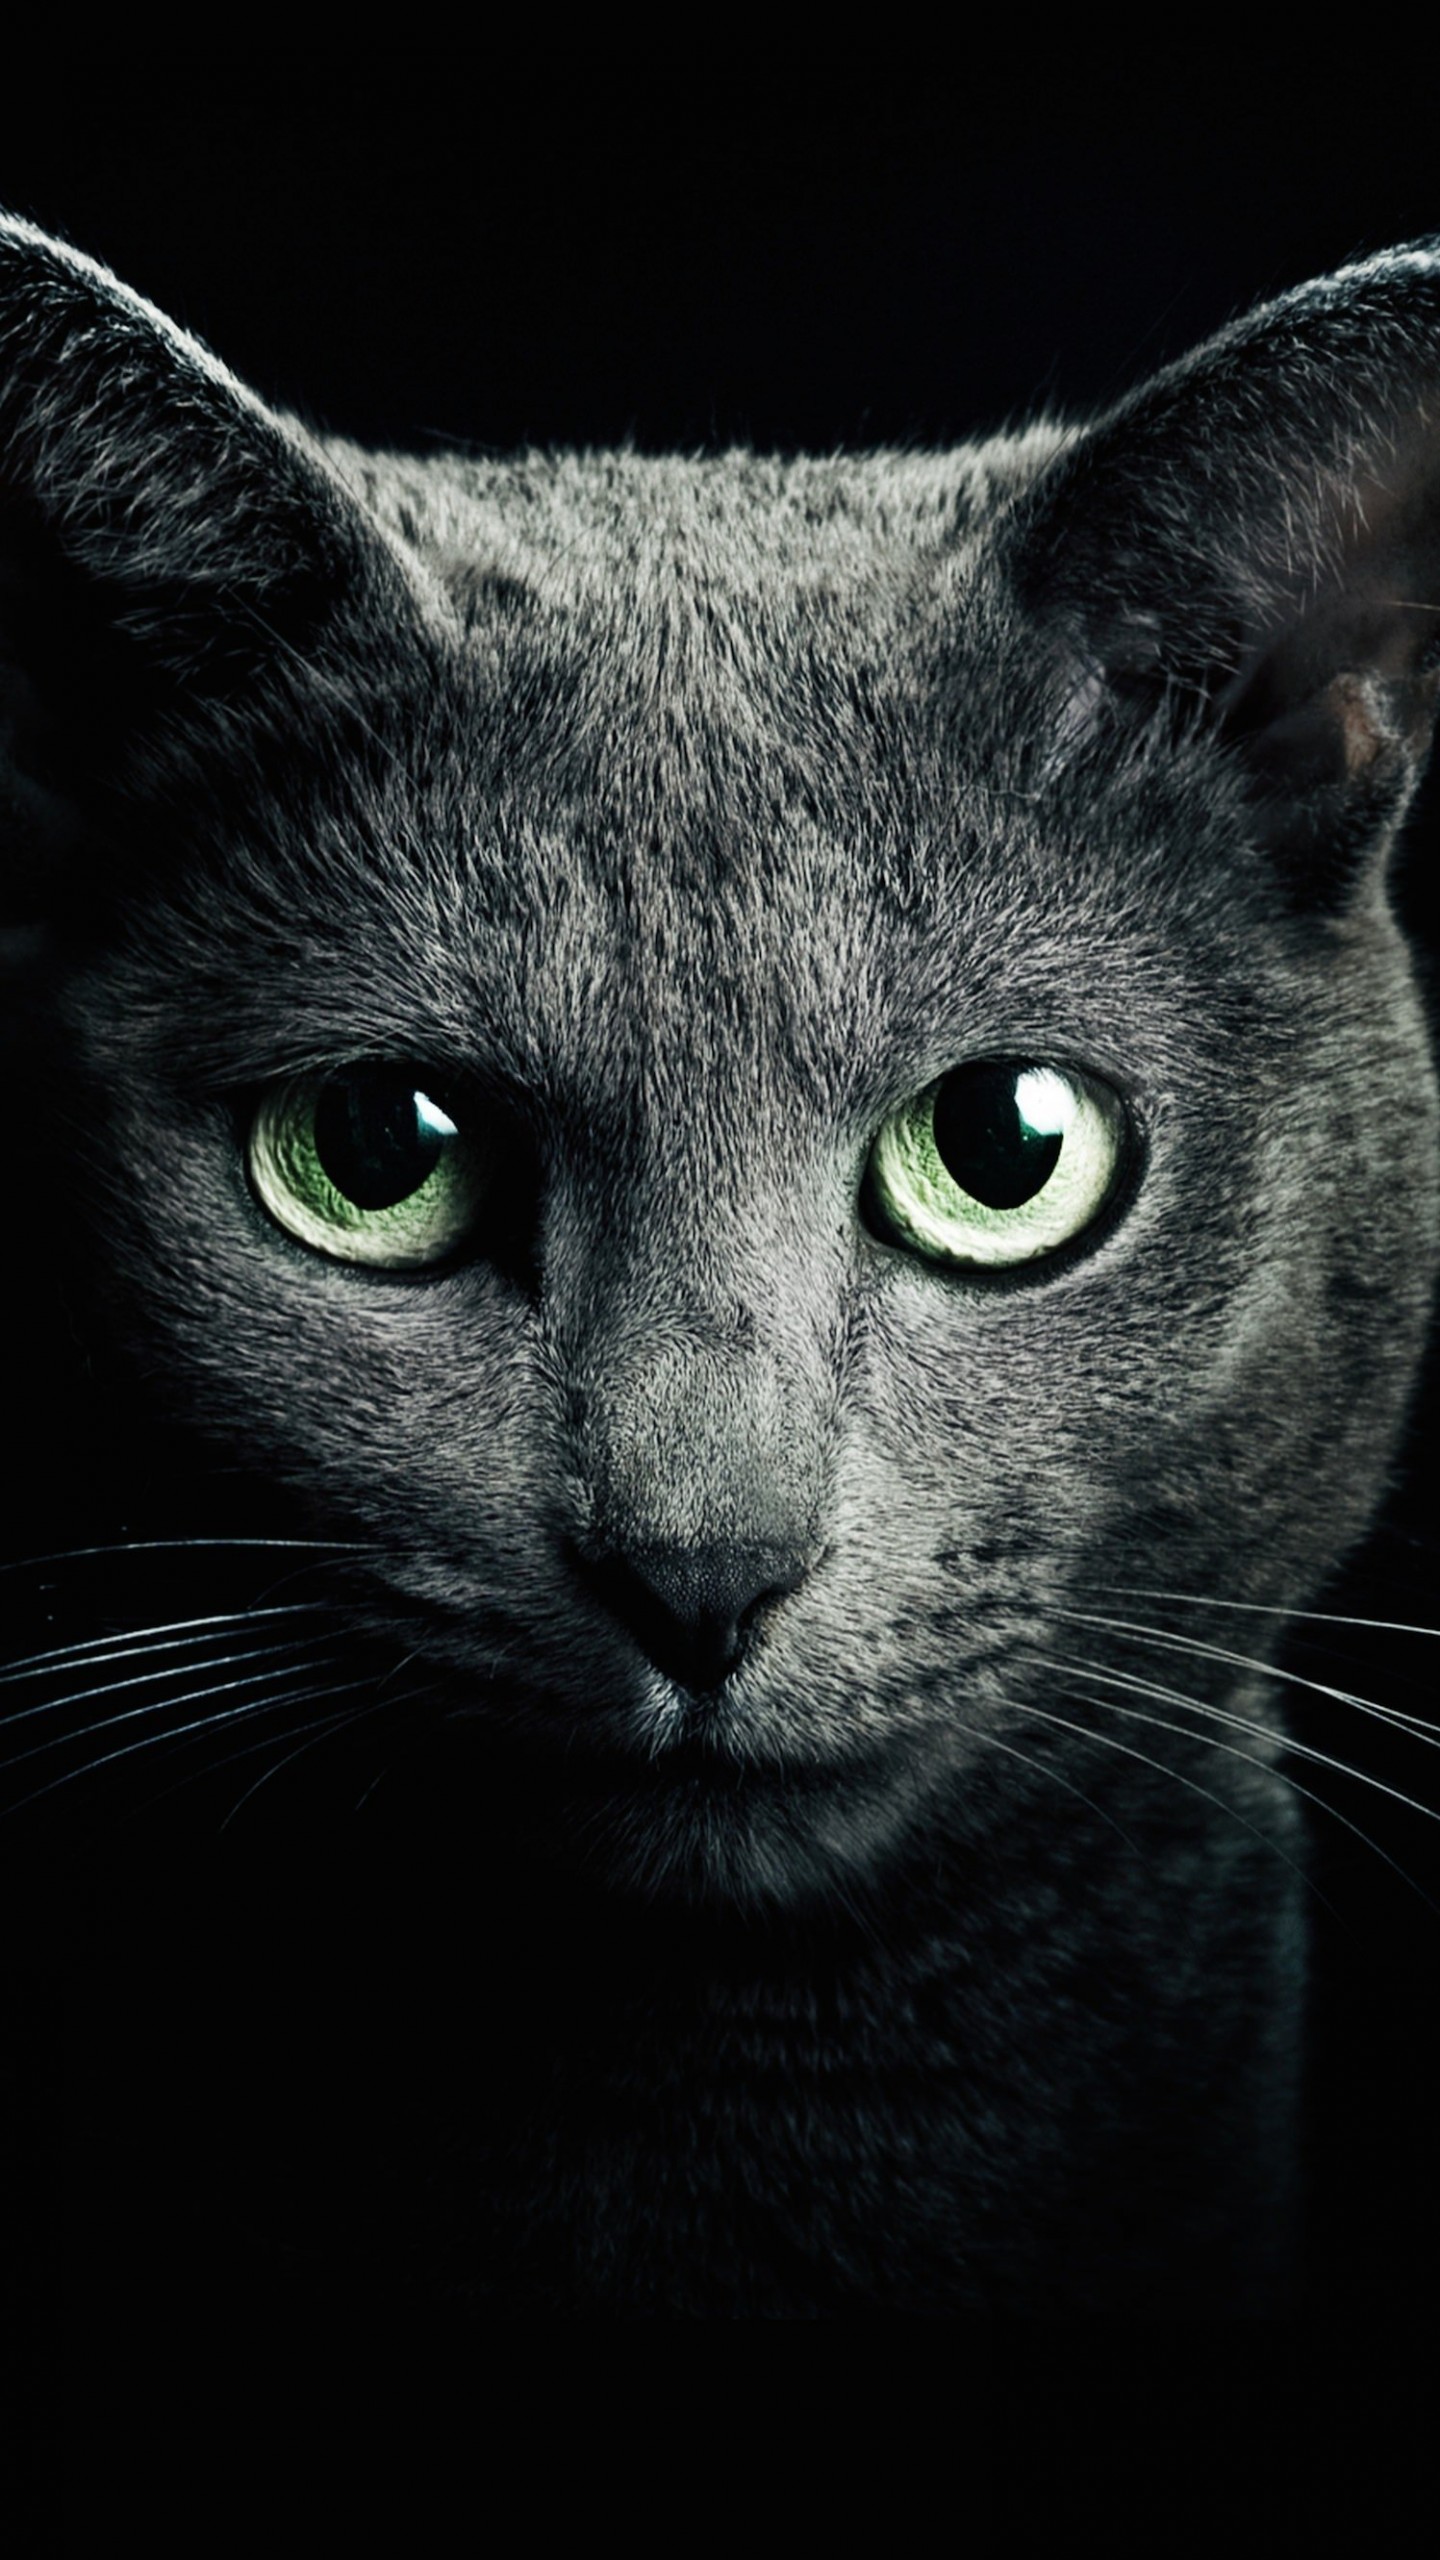 Russian Blue Cat Wallpaper for SAMSUNG Galaxy Note 4